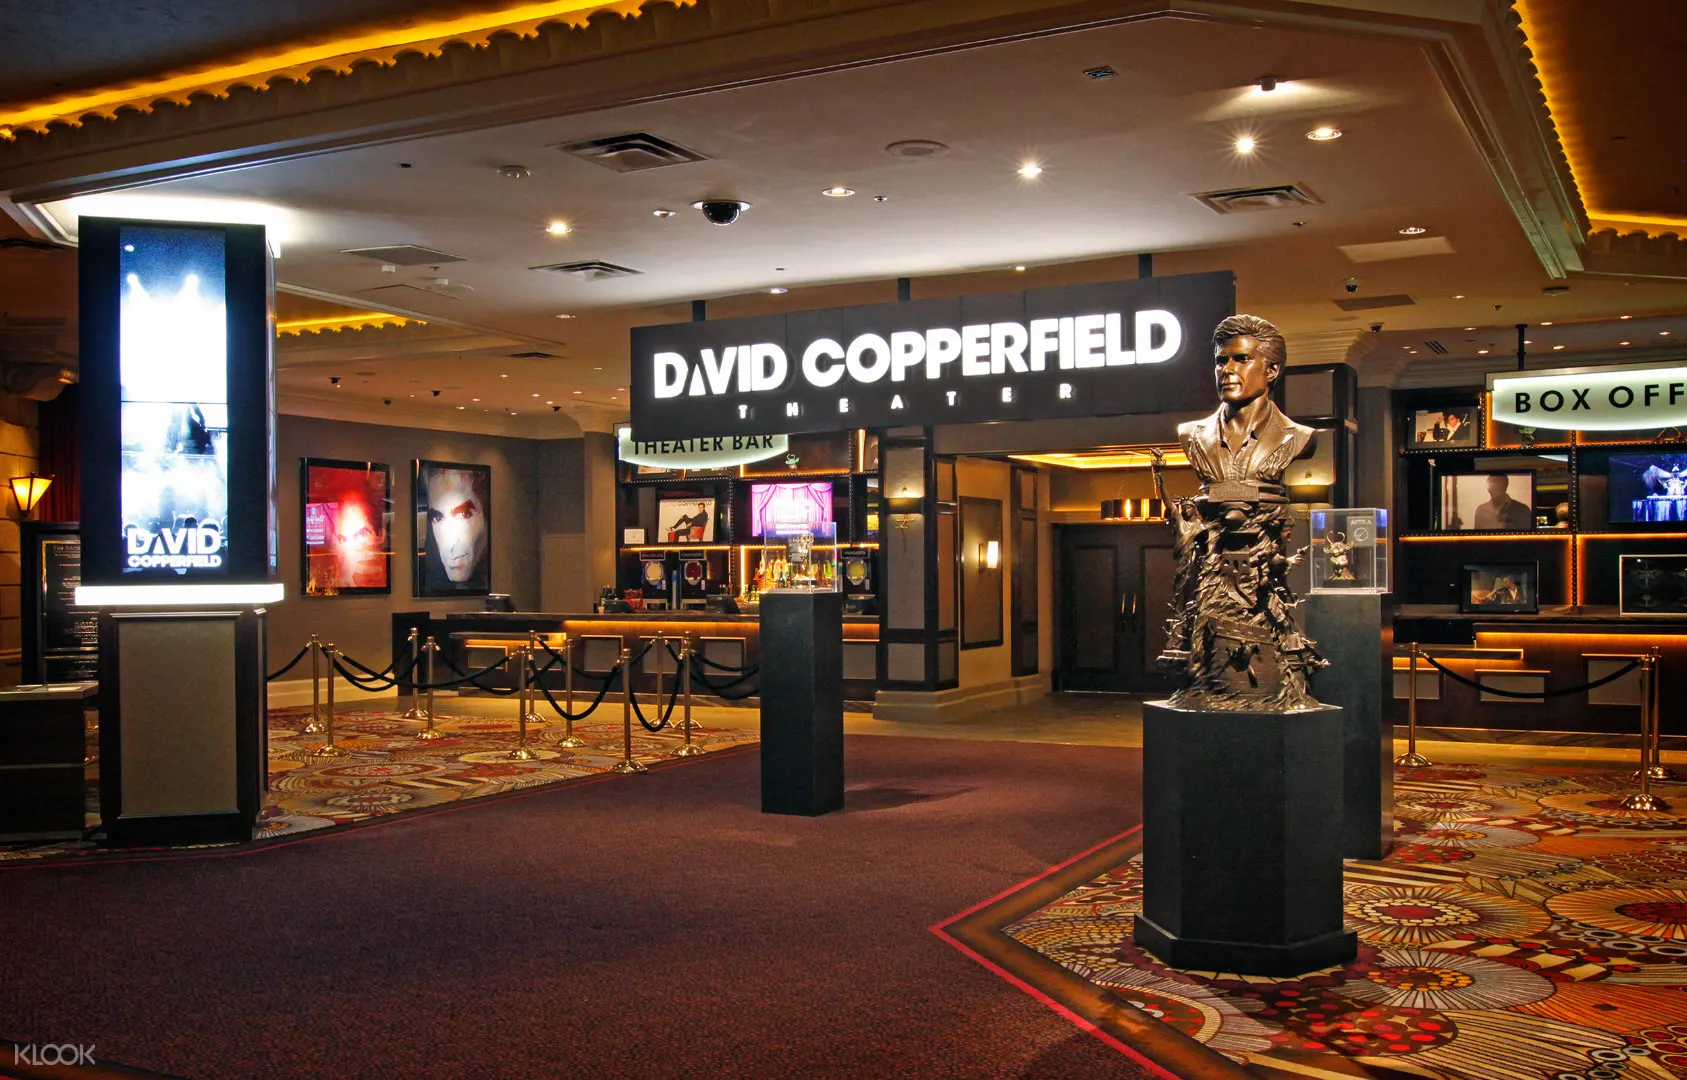 David Copperfield Show Seating Chart